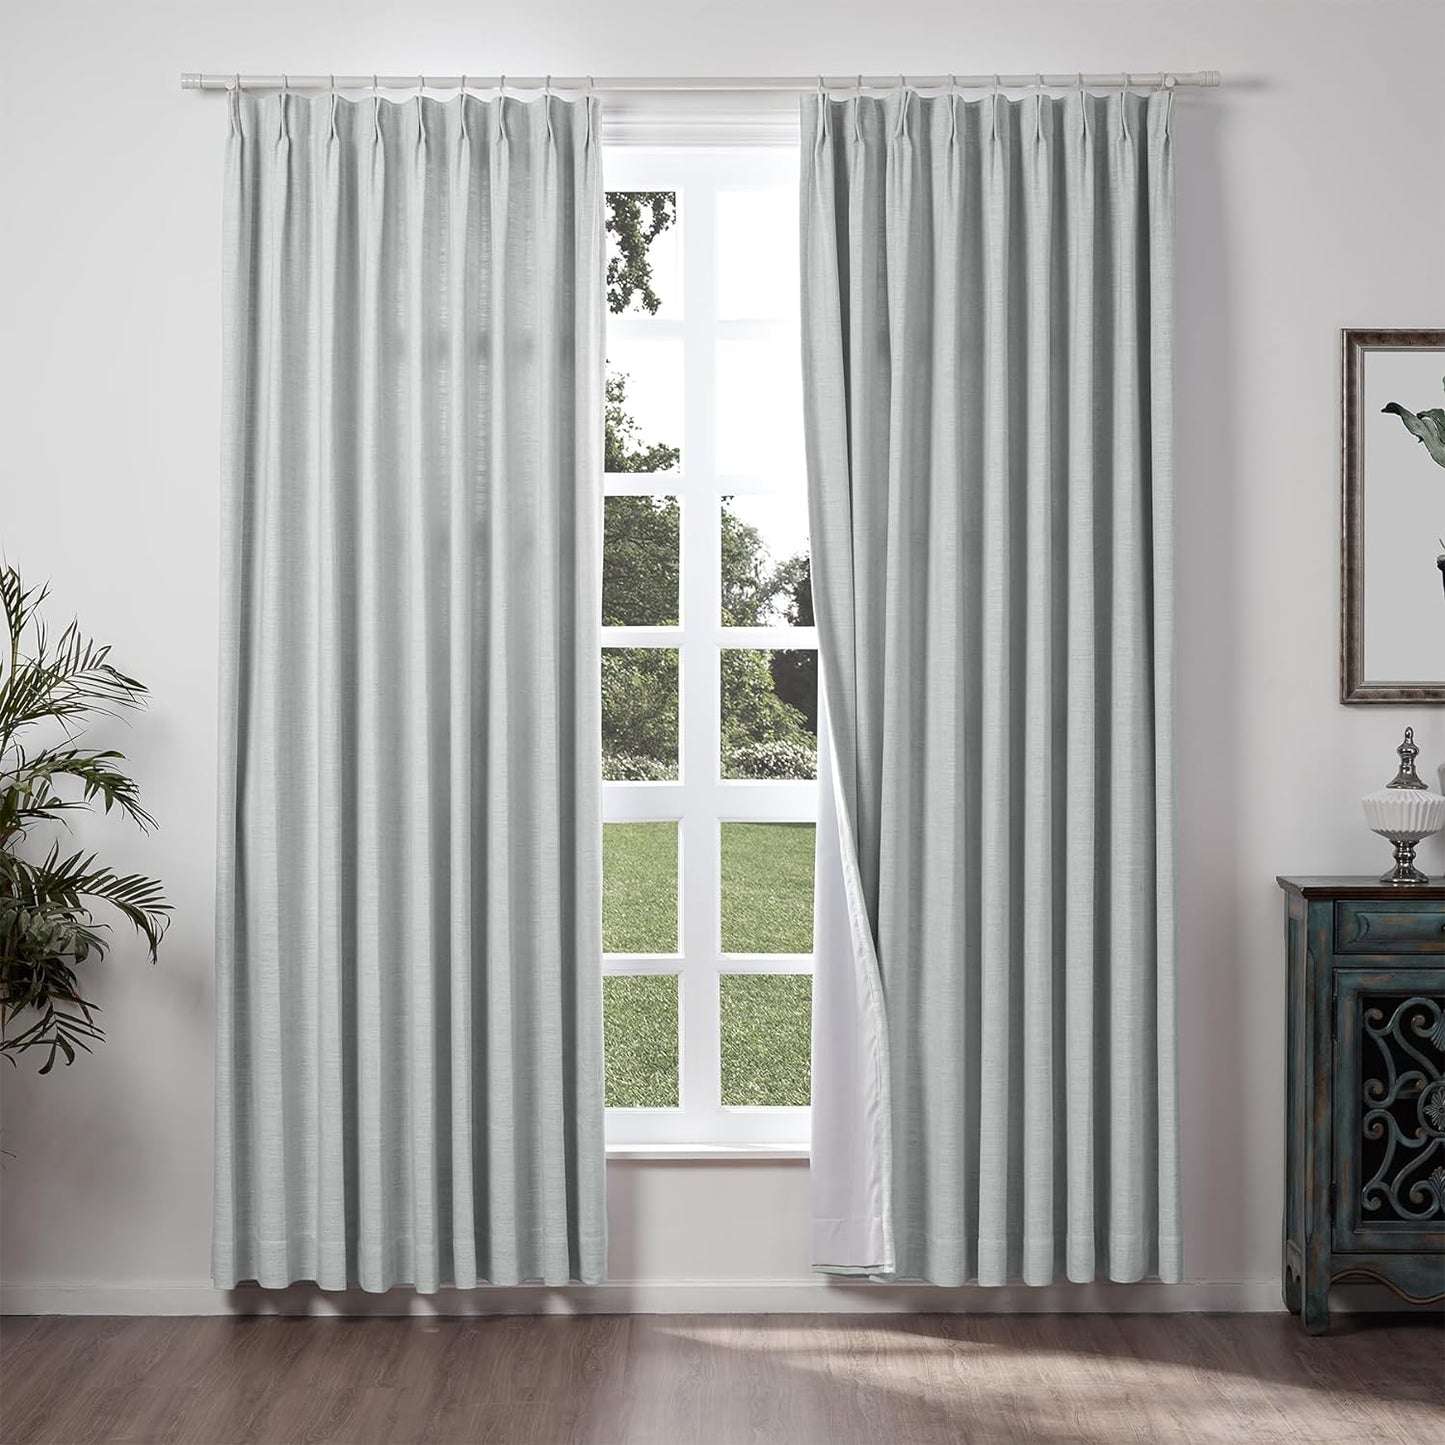 Chadmade 50" W X 63" L Polyester Linen Drape with Blackout Lining Pinch Pleat Curtain for Sliding Door Patio Door Living Room Bedroom, (1 Panel) Sand Beige Tallis Collection  ChadMade Fog (18) 50Wx63L 